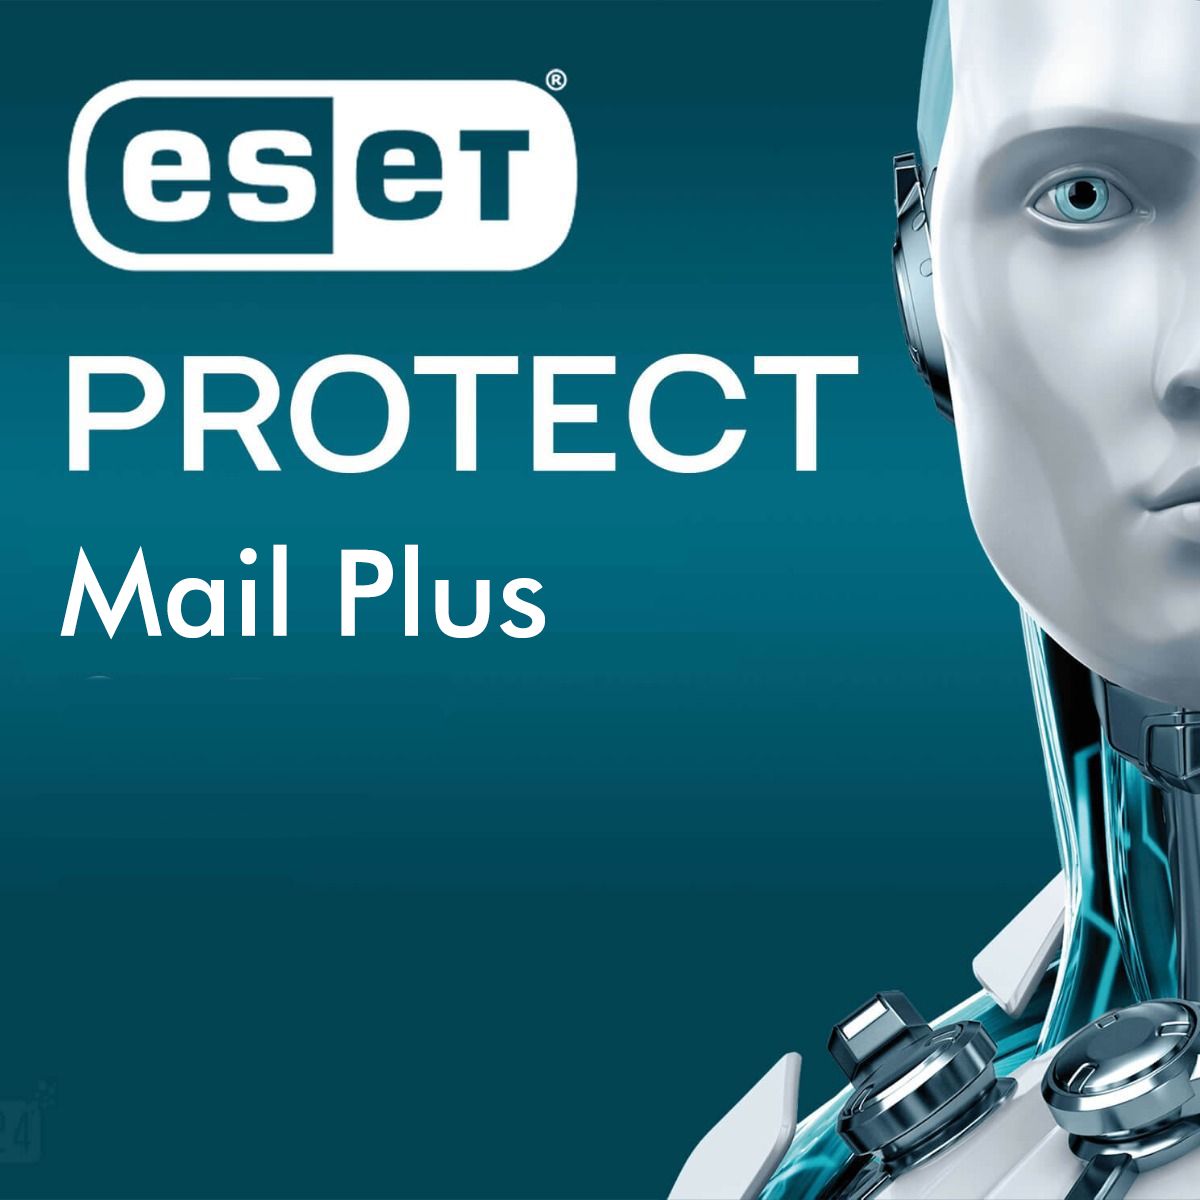 ESET Protect Mail Plus 1-Year Subscription License